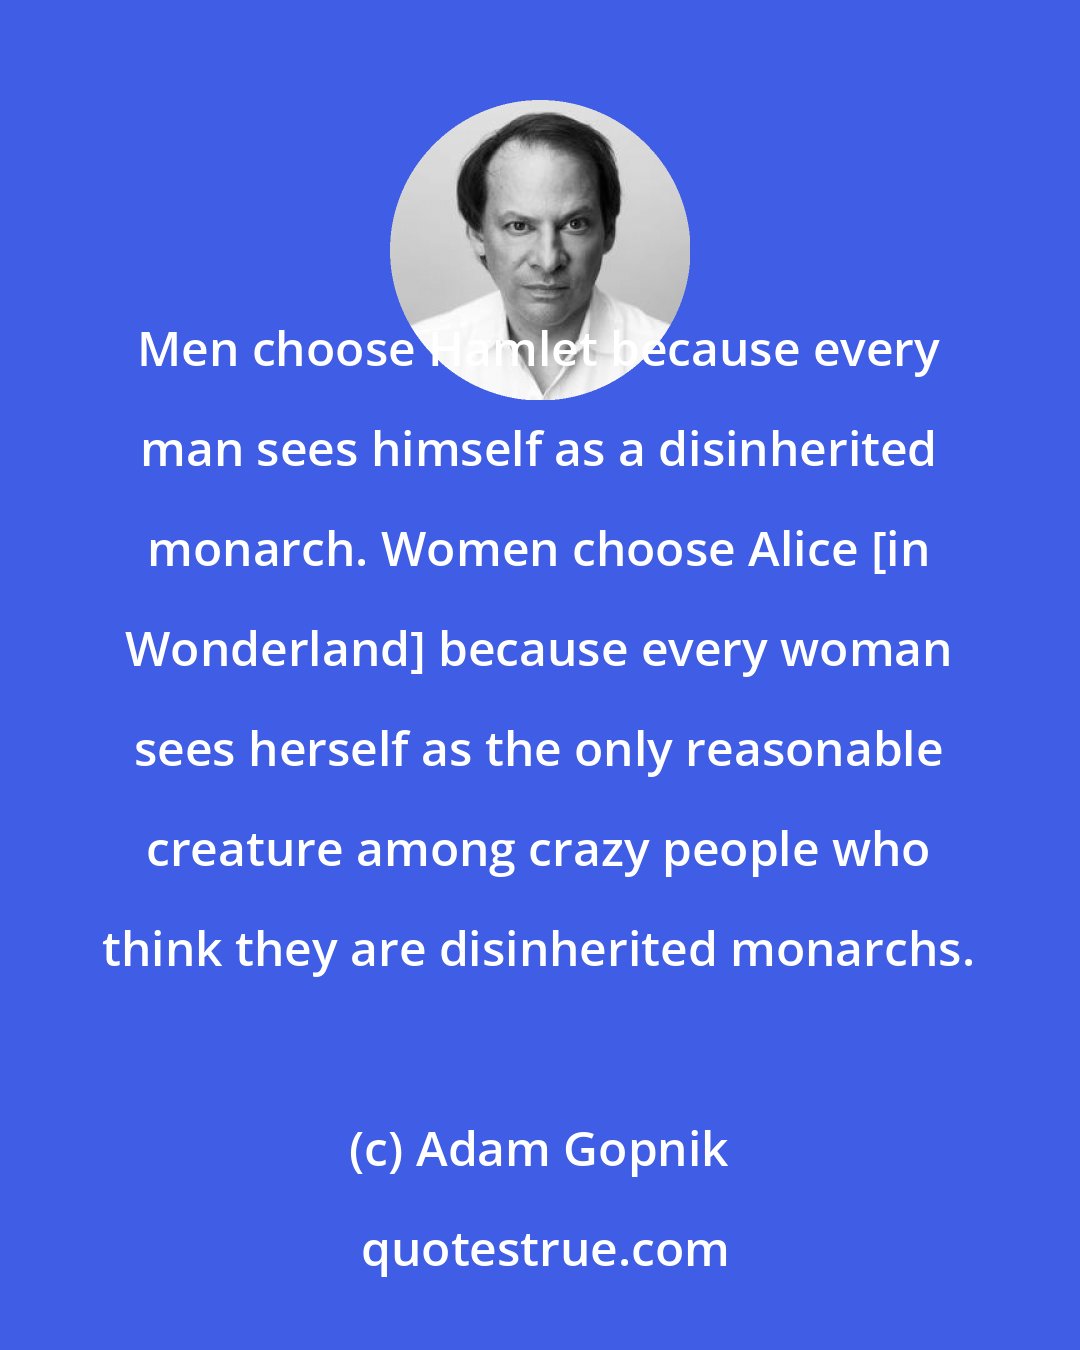 Adam Gopnik: Men choose Hamlet because every man sees himself as a disinherited monarch. Women choose Alice [in Wonderland] because every woman sees herself as the only reasonable creature among crazy people who think they are disinherited monarchs.